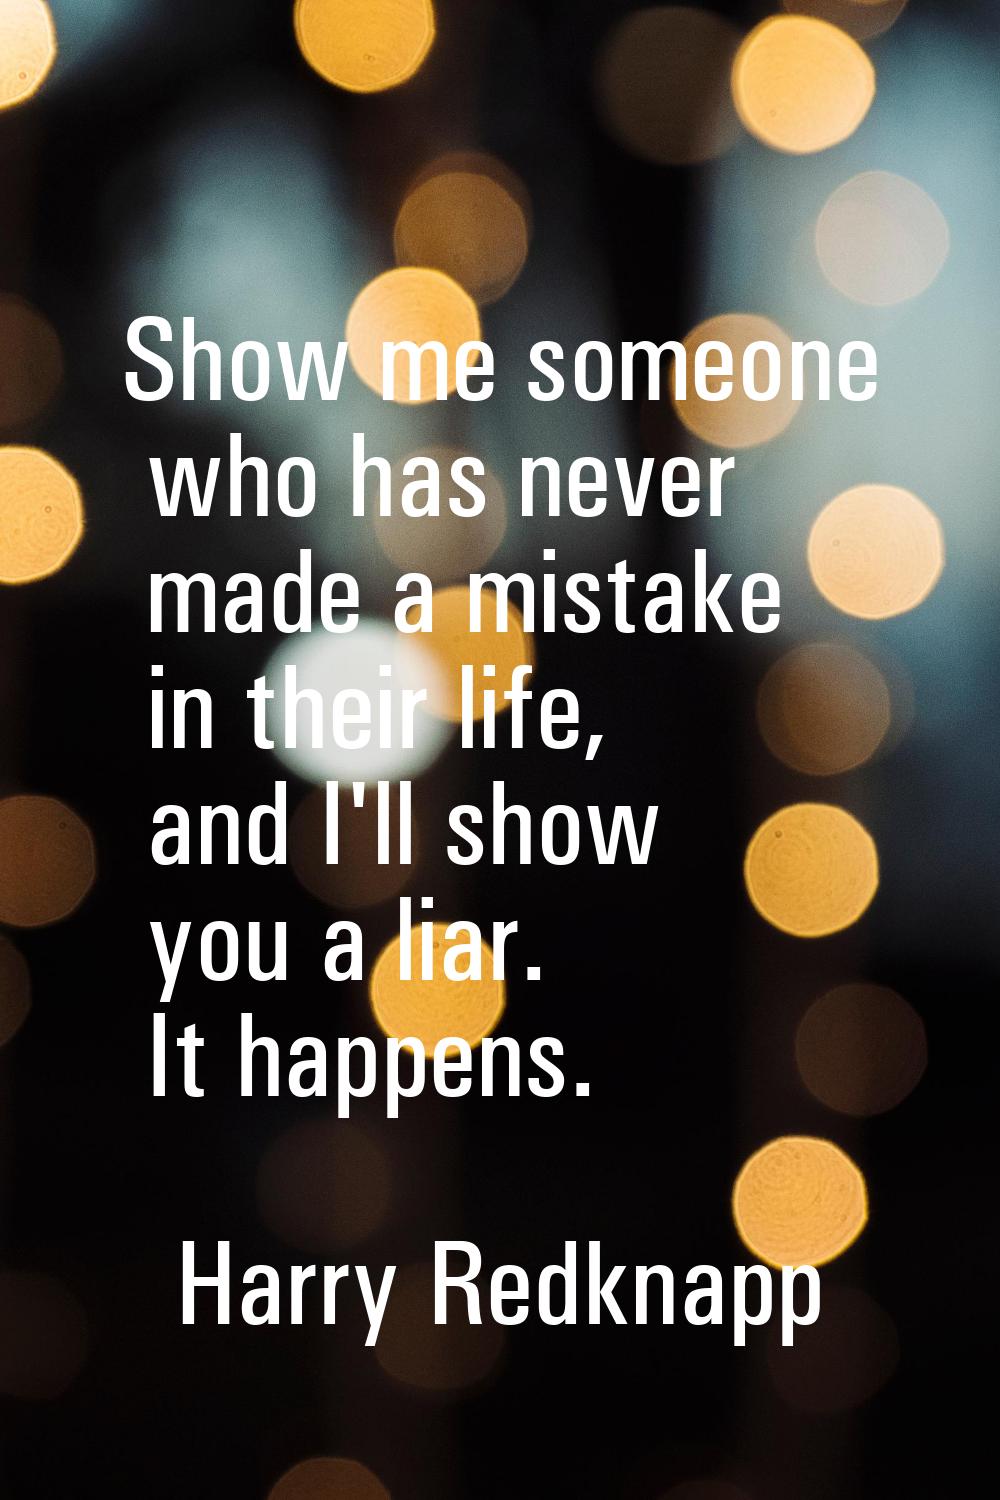 Show me someone who has never made a mistake in their life, and I'll show you a liar. It happens.